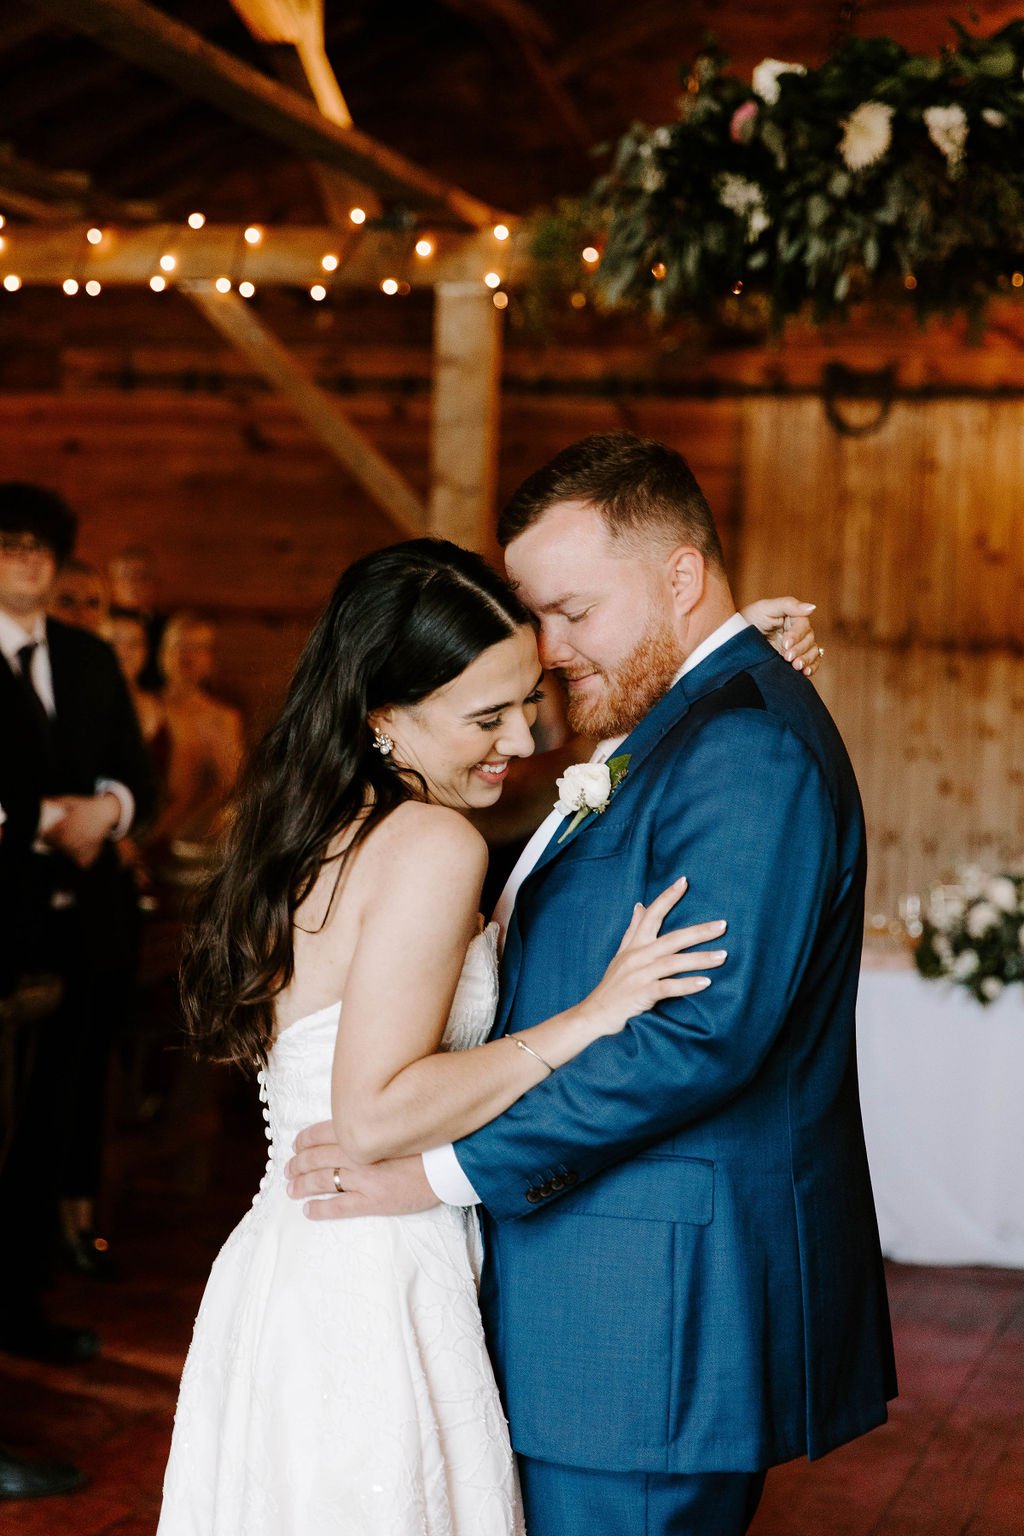 Bride and groom dancing close to one another smiling and laughing